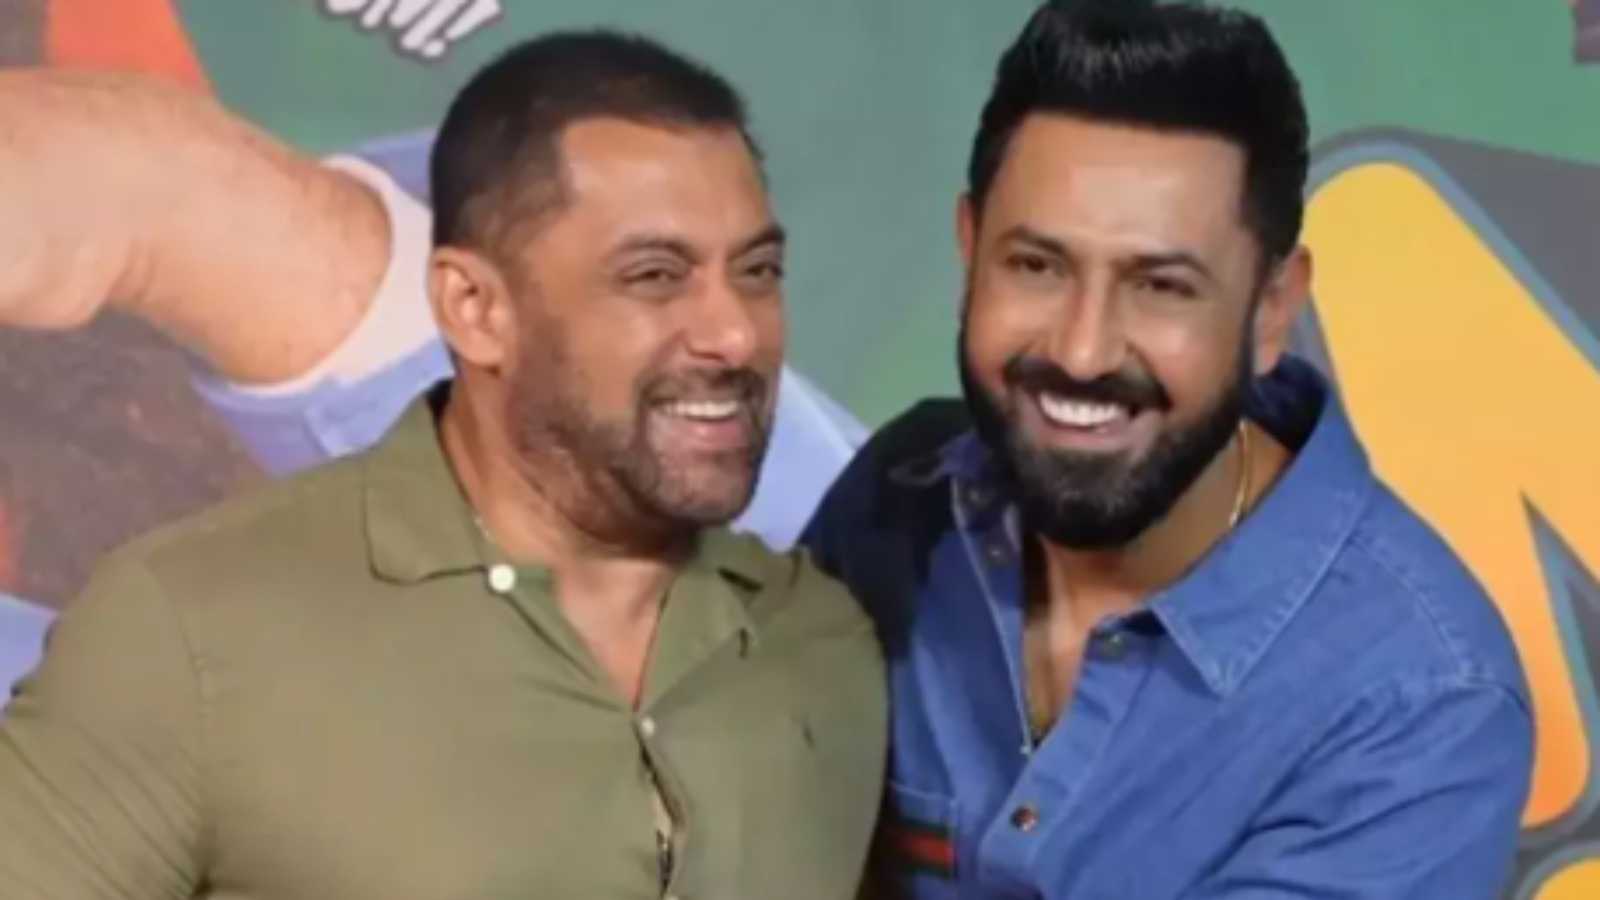 'Have no friendship with Salman Khan': Gippy Grewal in shock after gunshots fired at his home by Lawrence Bishnoi